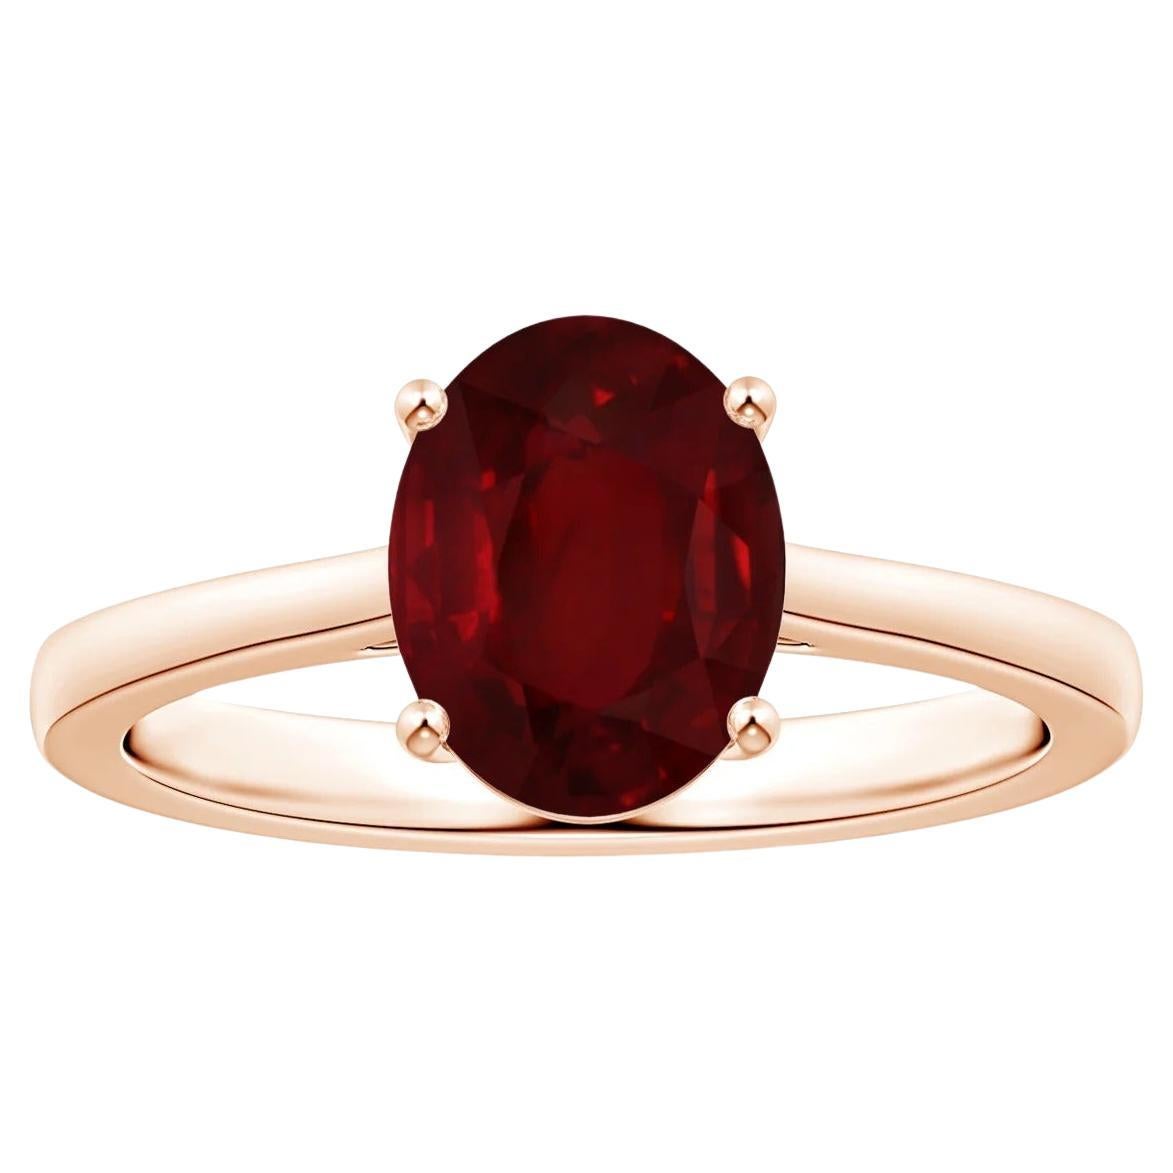 For Sale:  ANGARA GIA Certified Ruby Solitaire Ring in Rose Gold with Reverse Tapered Shank